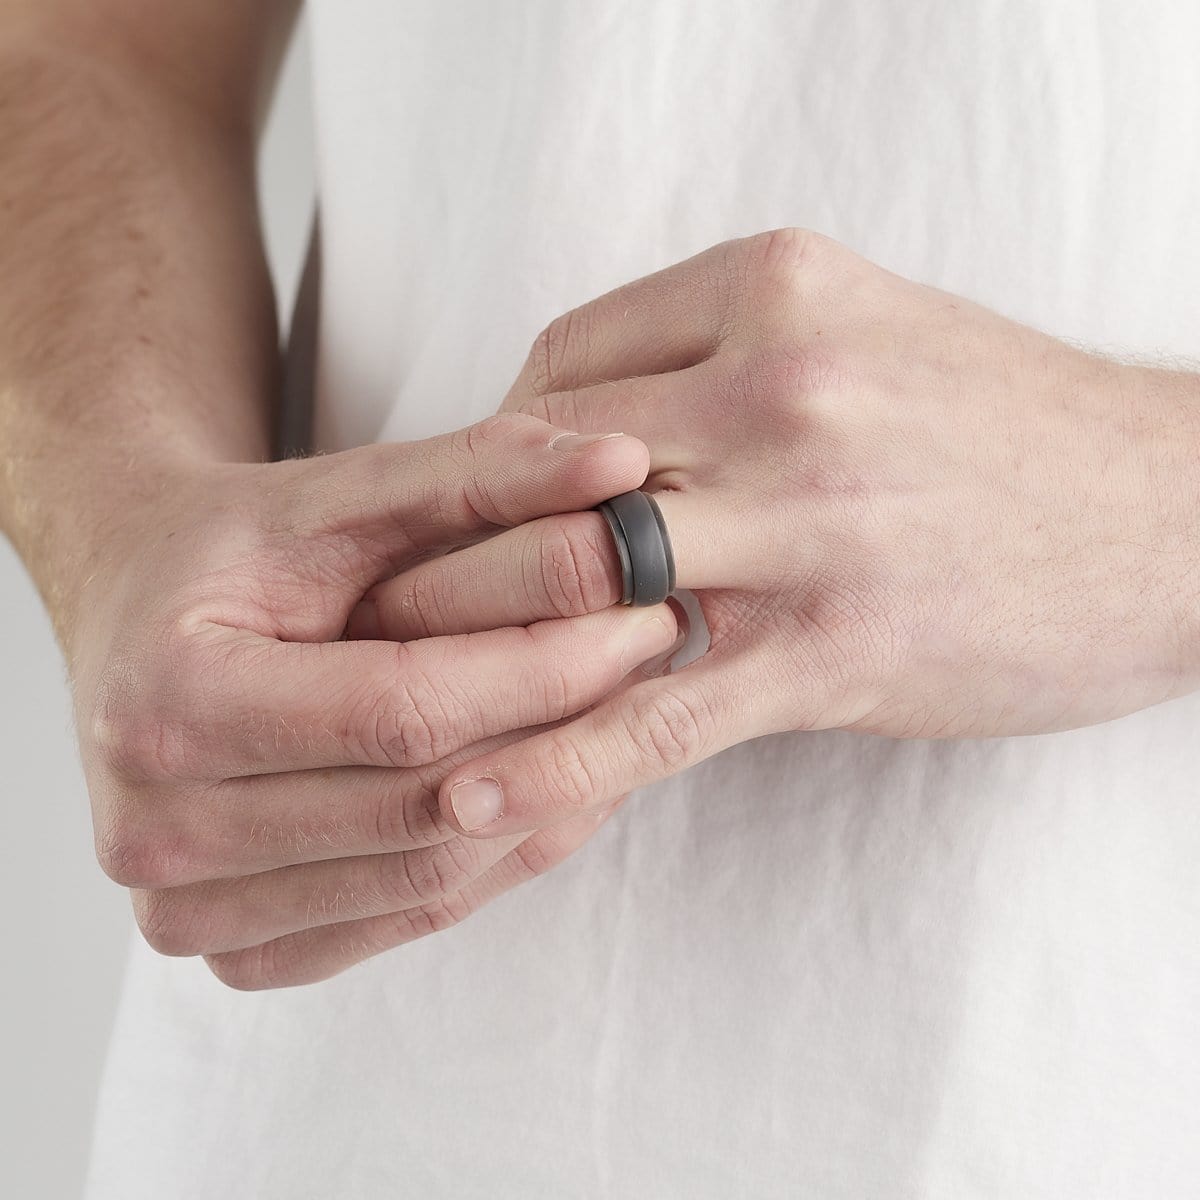 Men’s Stepped Edge Silicone Ring